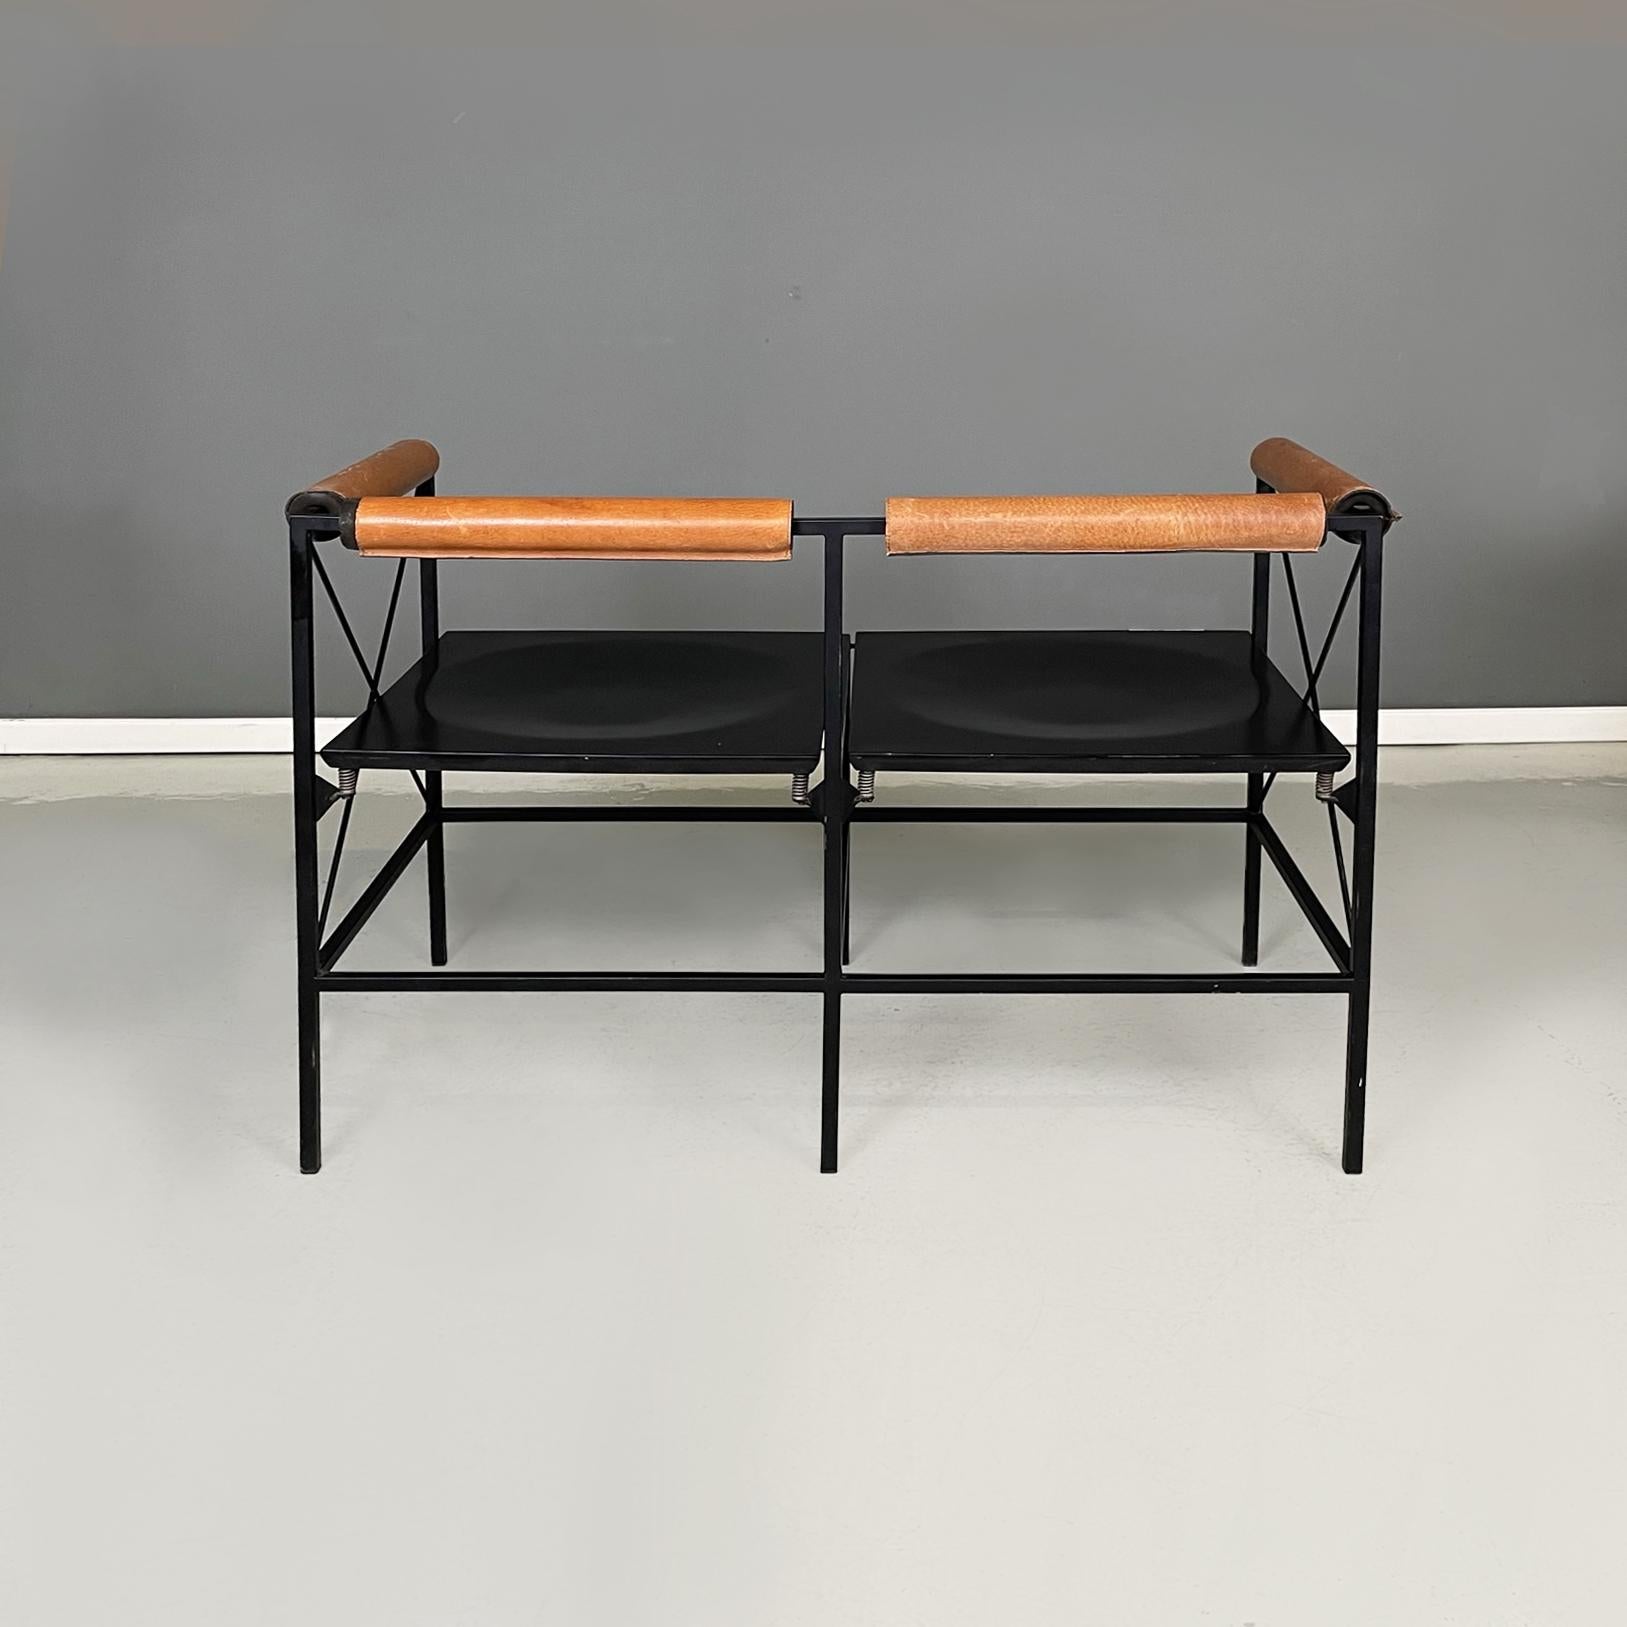 Late 20th Century Italian modern black metal wood brown leather 2seater benches Felicerossi, 1980s For Sale